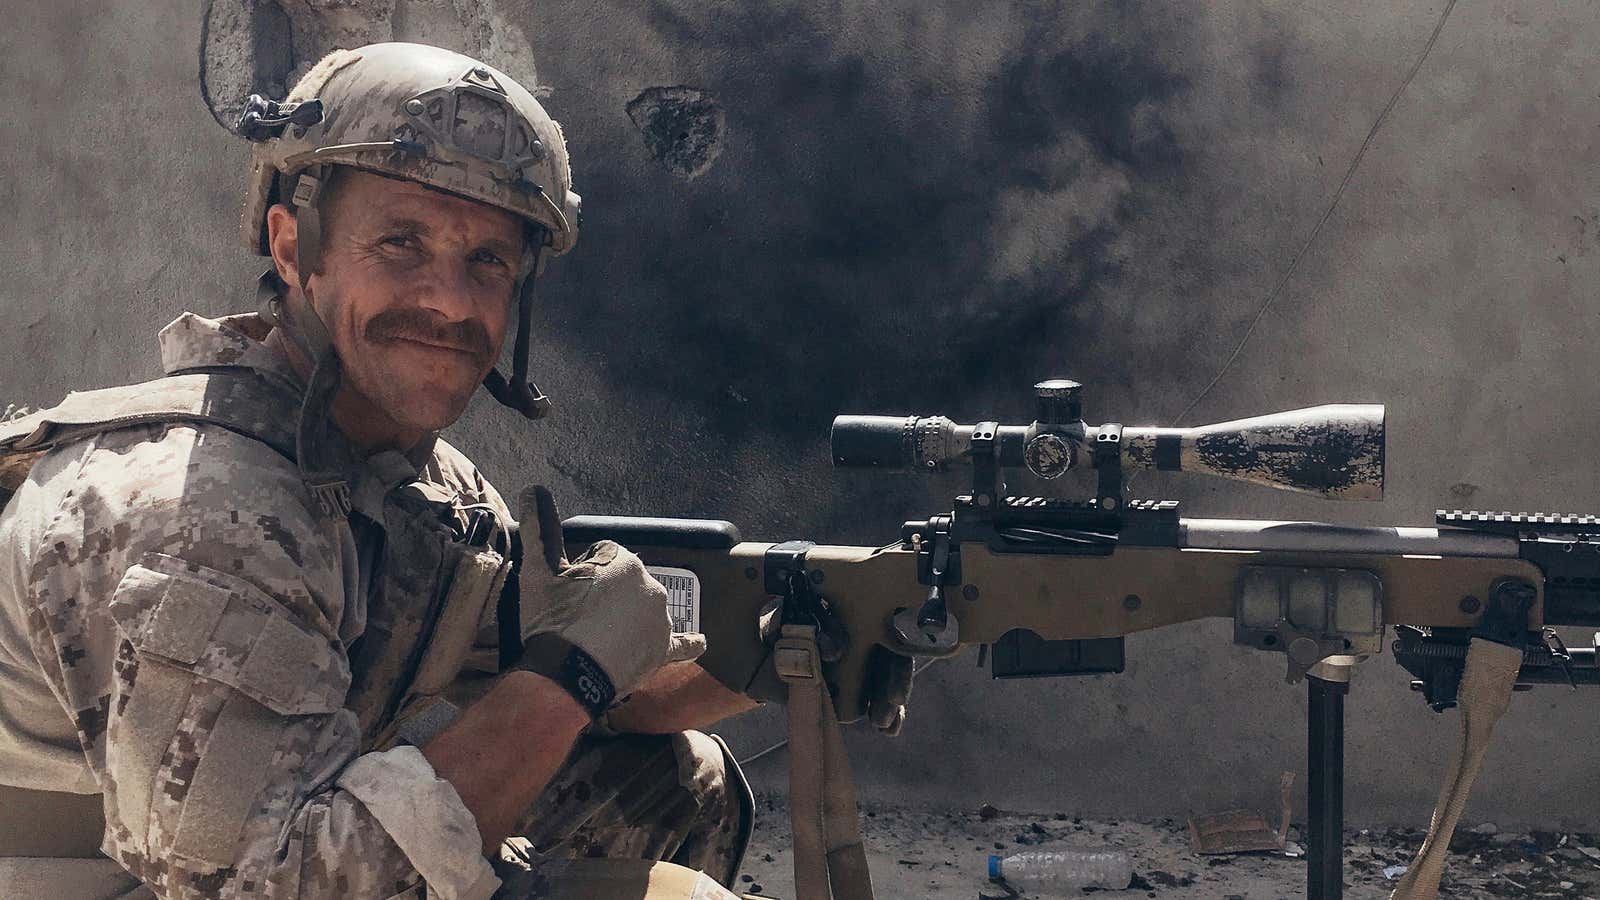 Edward Gallagher, a decorated Navy SEAL and special operations chief, charged with murder.